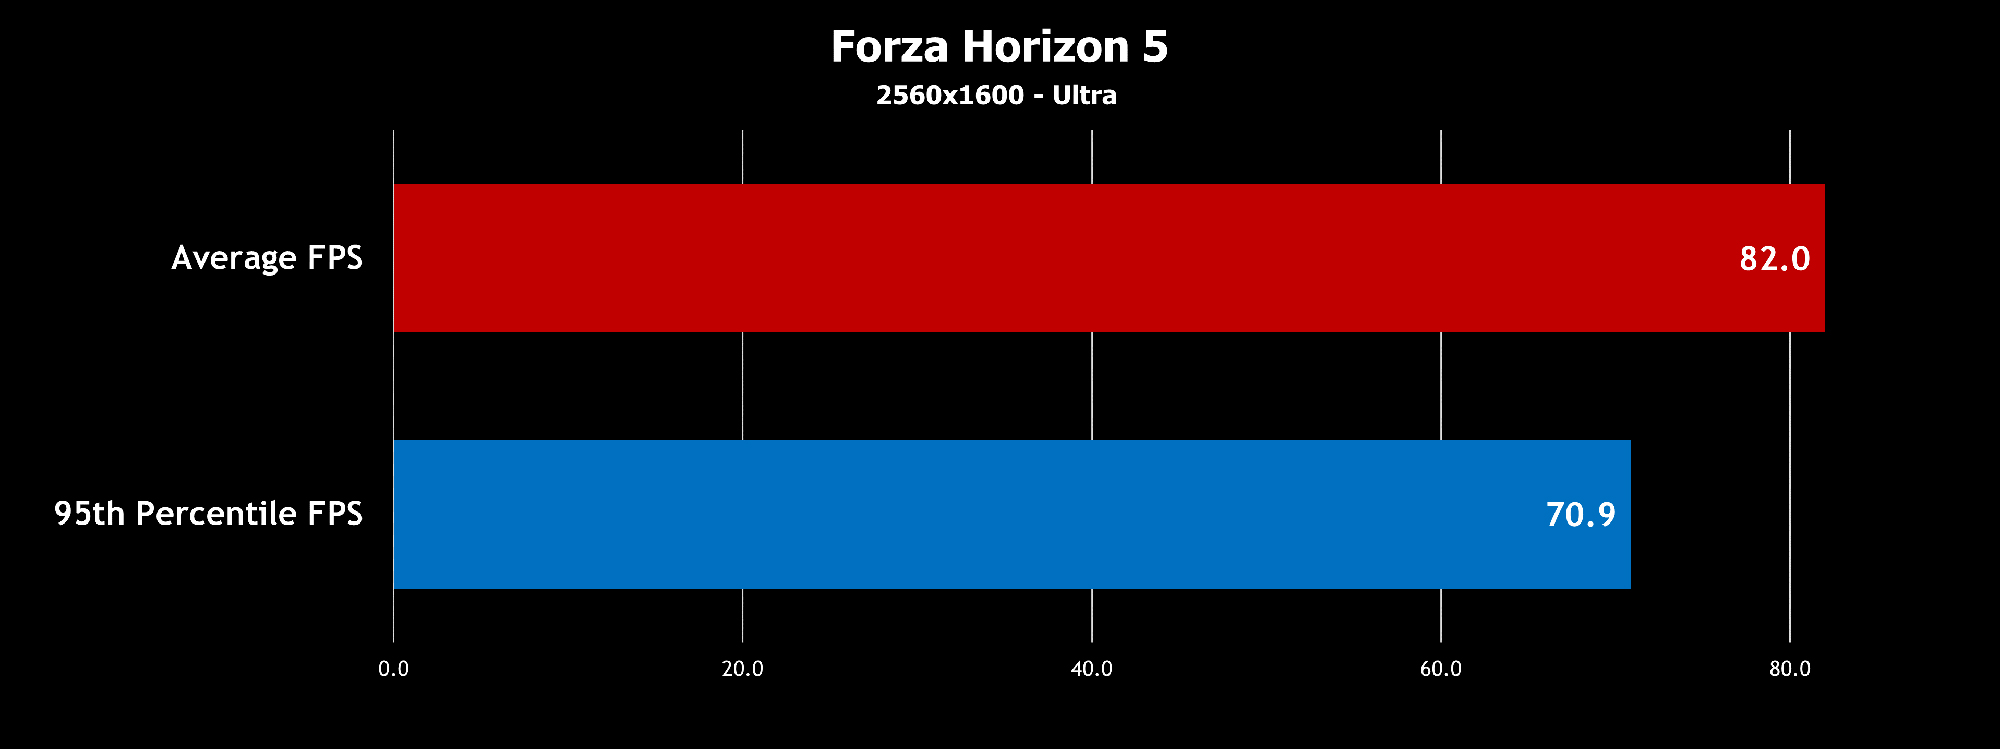 A bar graph showing an average of 82.0 frames per second and a minimum framerate of 70.9 frames per second in Forza Horizon 5.